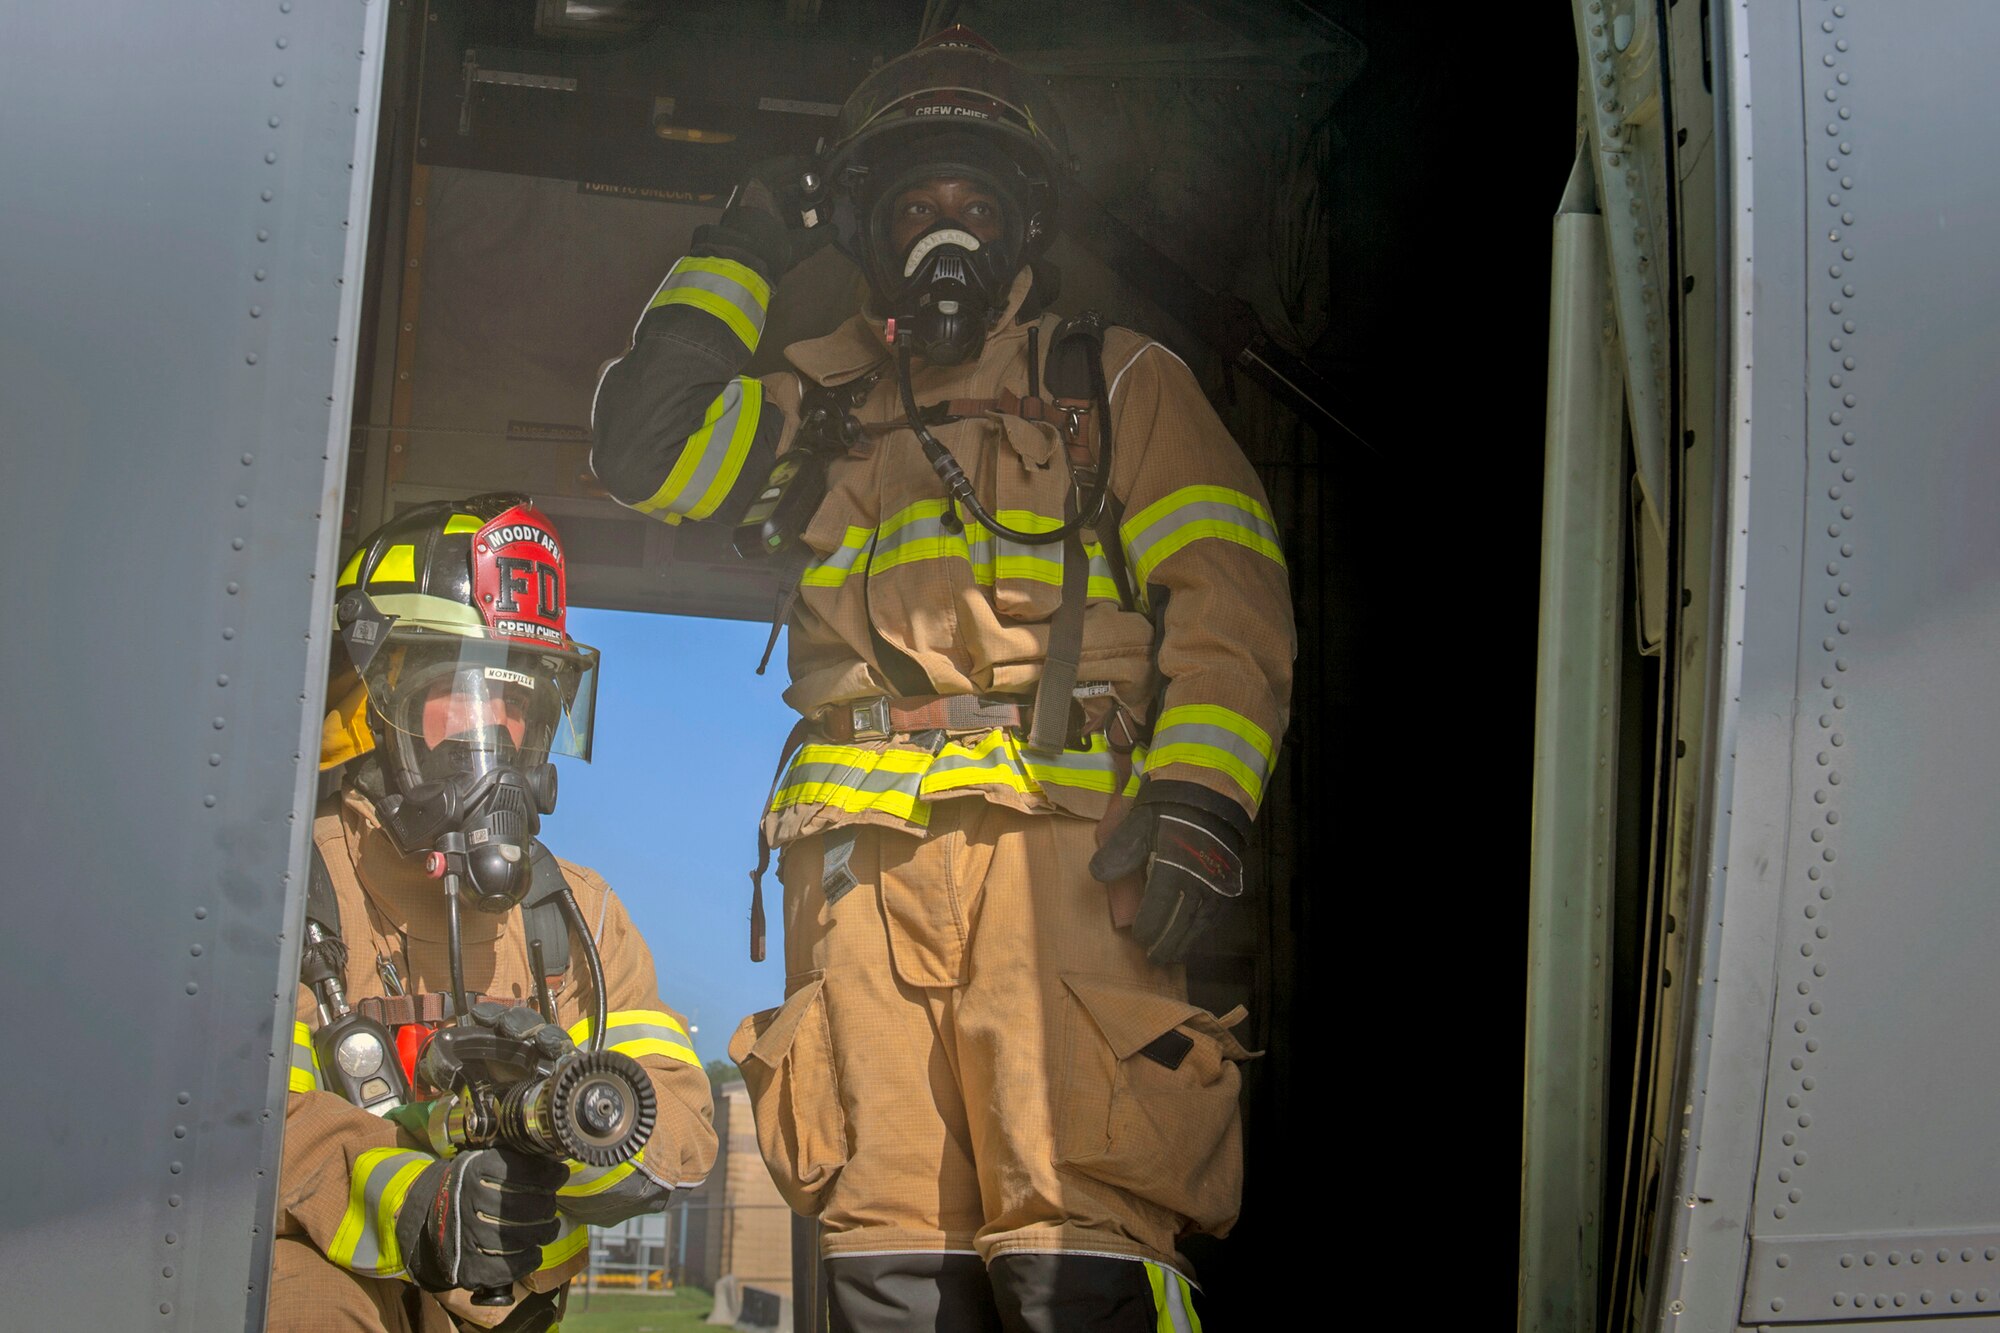 Staff Sgt. Matthew Montville, left, and Staff Sgt. Tyler McFarland, right, both 23d Civil Engineering Squadron firefighter crew chiefs, hold their position during an HC-130J Combat King II egress training, July 11, 2019, on Moody Air Force Base, Ga. The 23d CES conducted the exercise to simulate the rescue of victims from a smoking C-130. The firefighters were tasked with locating and providing ventilation within the aircraft to safely remove the victims. (U.S. Air Force photo by Airman Azaria E. Foster)